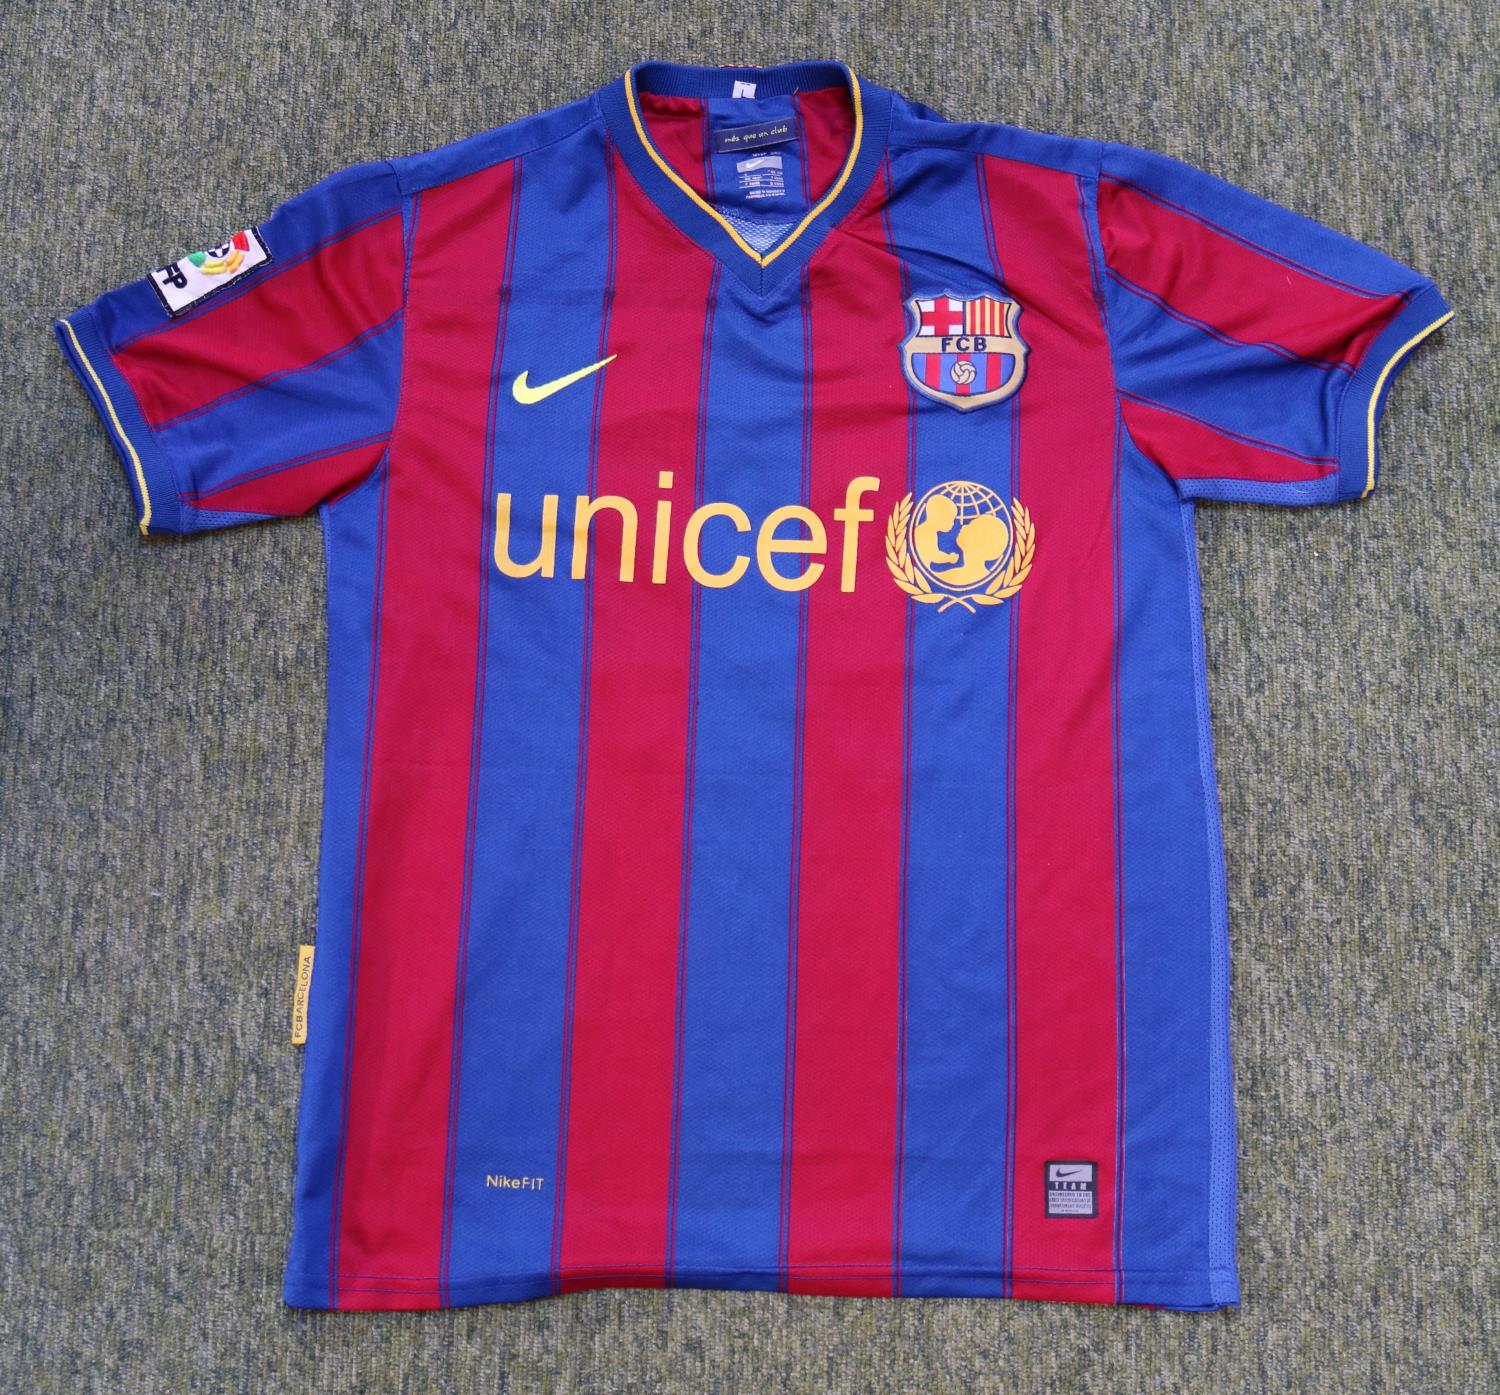 LIONEL MESSI 2009/2010 SIGNED BARCELONA #10 JERSEY The jersey is accompanied by a letter of